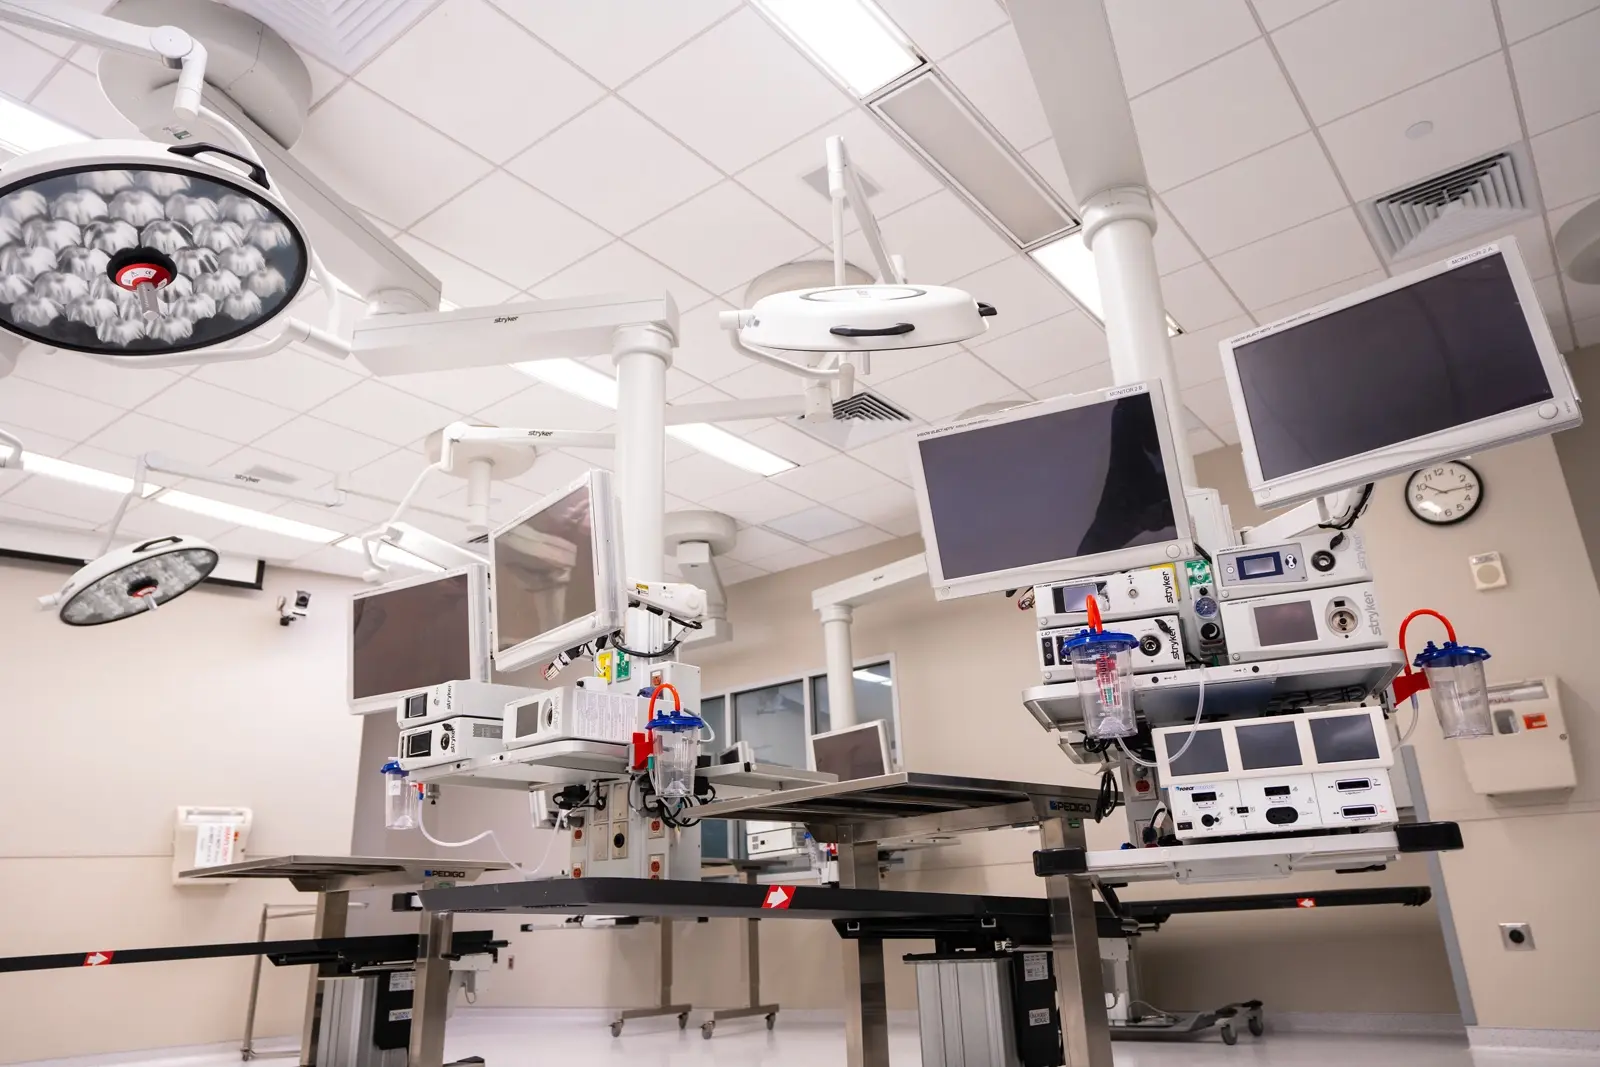 CAMLS A modern, sterile hospital operating room with multiple monitors, surgical lights, and advanced medical equipment. The room is well-lit with white walls and ceiling, and there are empty operating tables in the center.